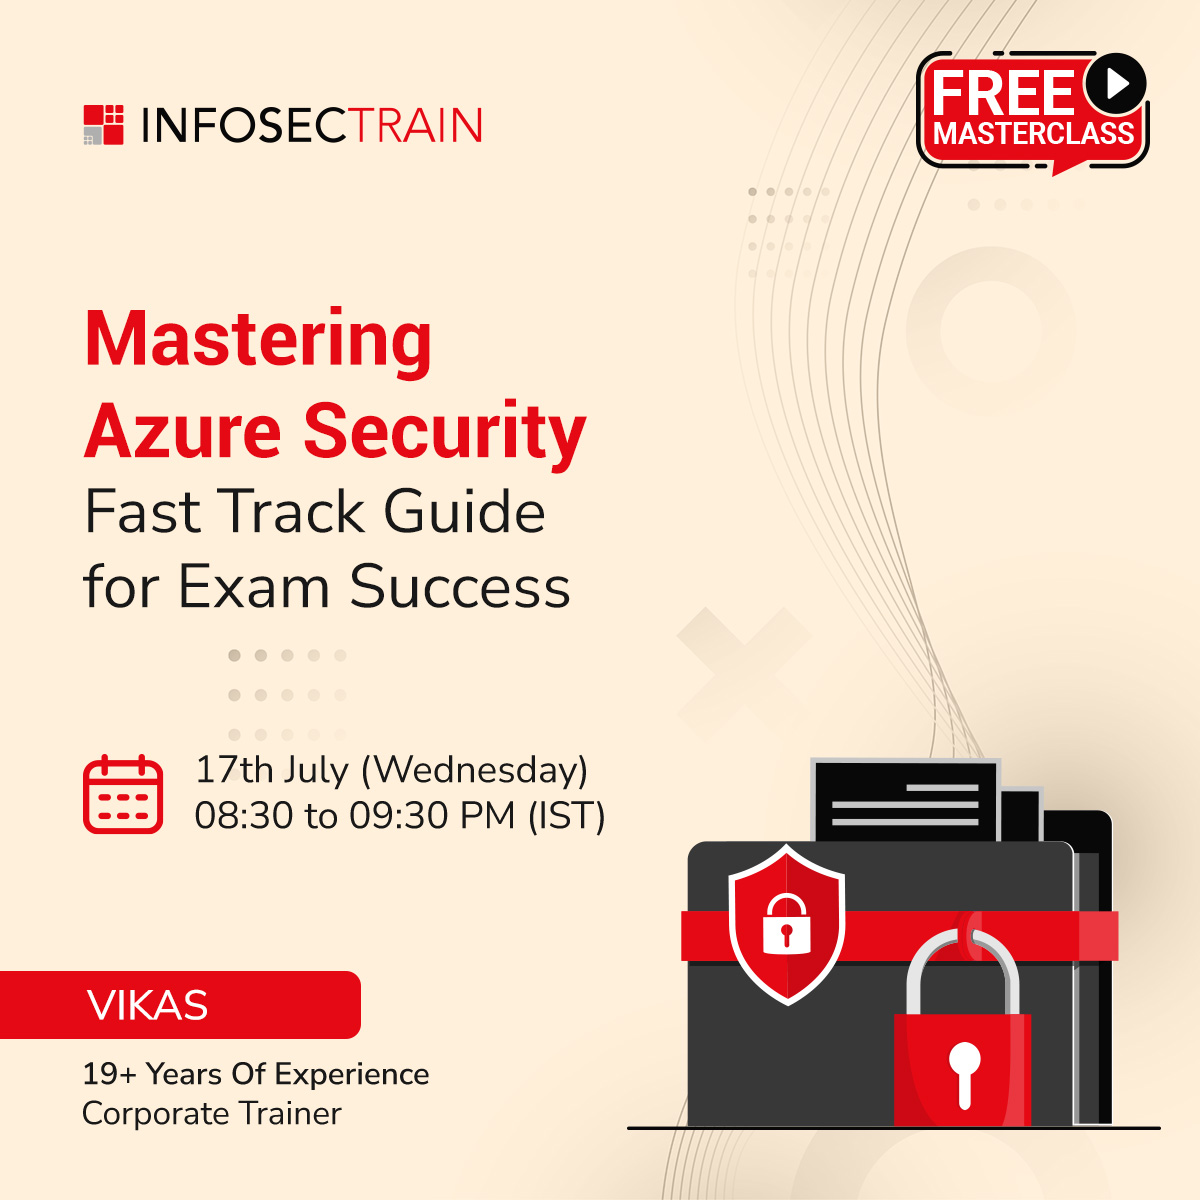 Free Session on "Mastering Azure Security: Fast Track Guide for Exam Success", Online Event